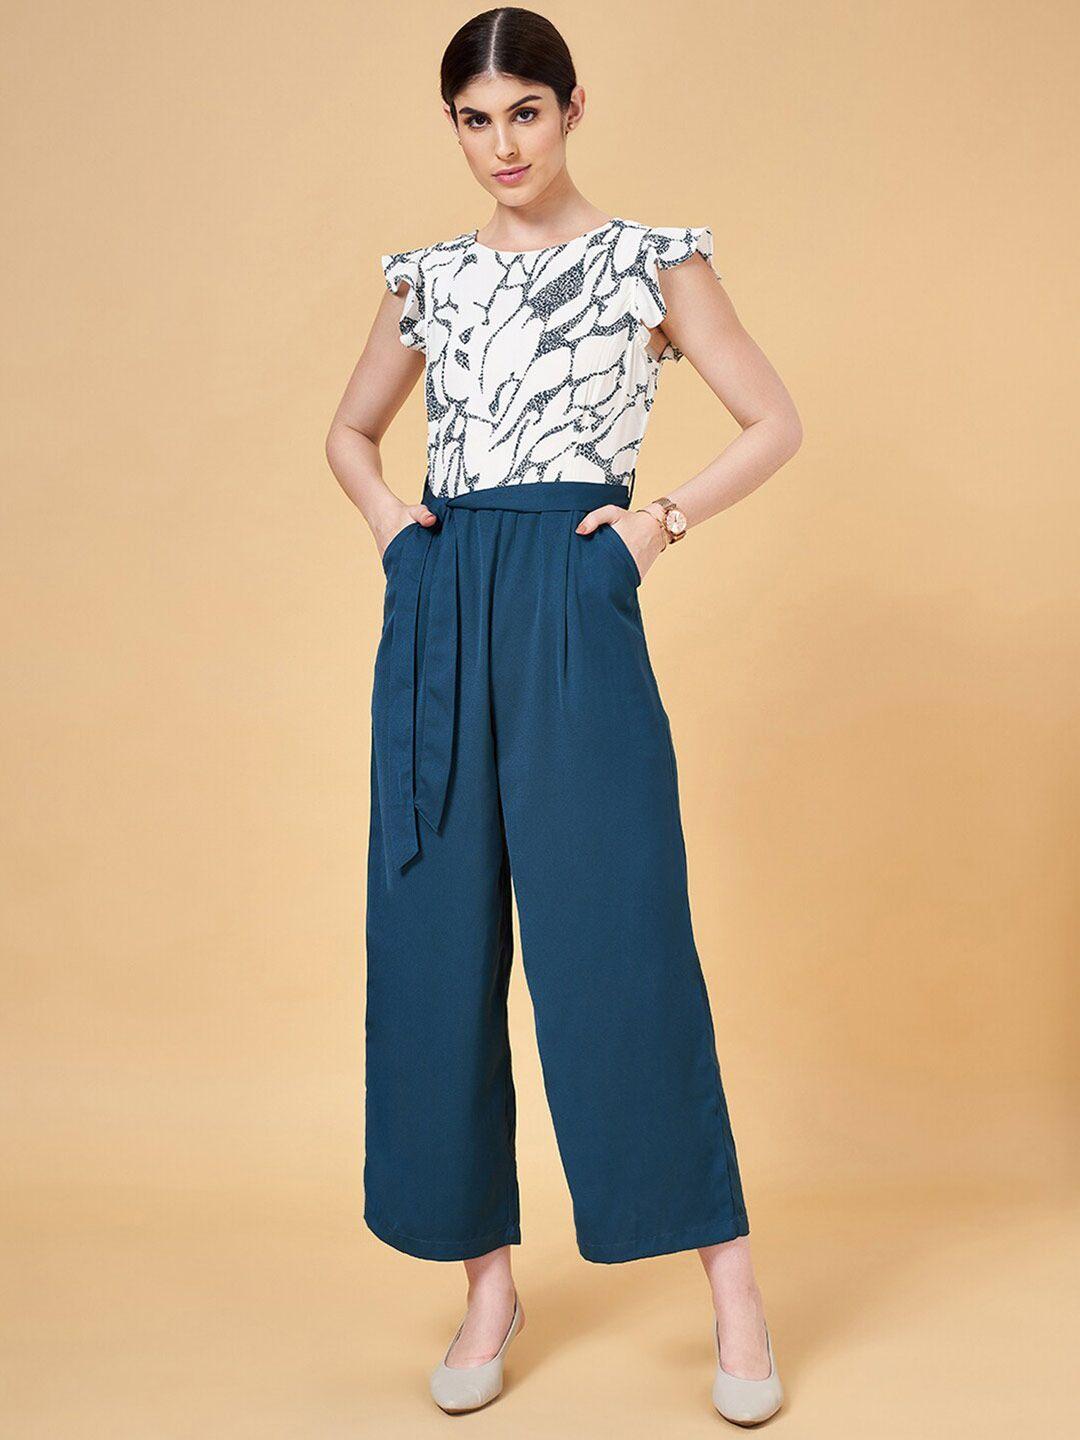 annabelle-by-pantaloons-abstract-printed-flutter-sleeve-basic-jumpsuit